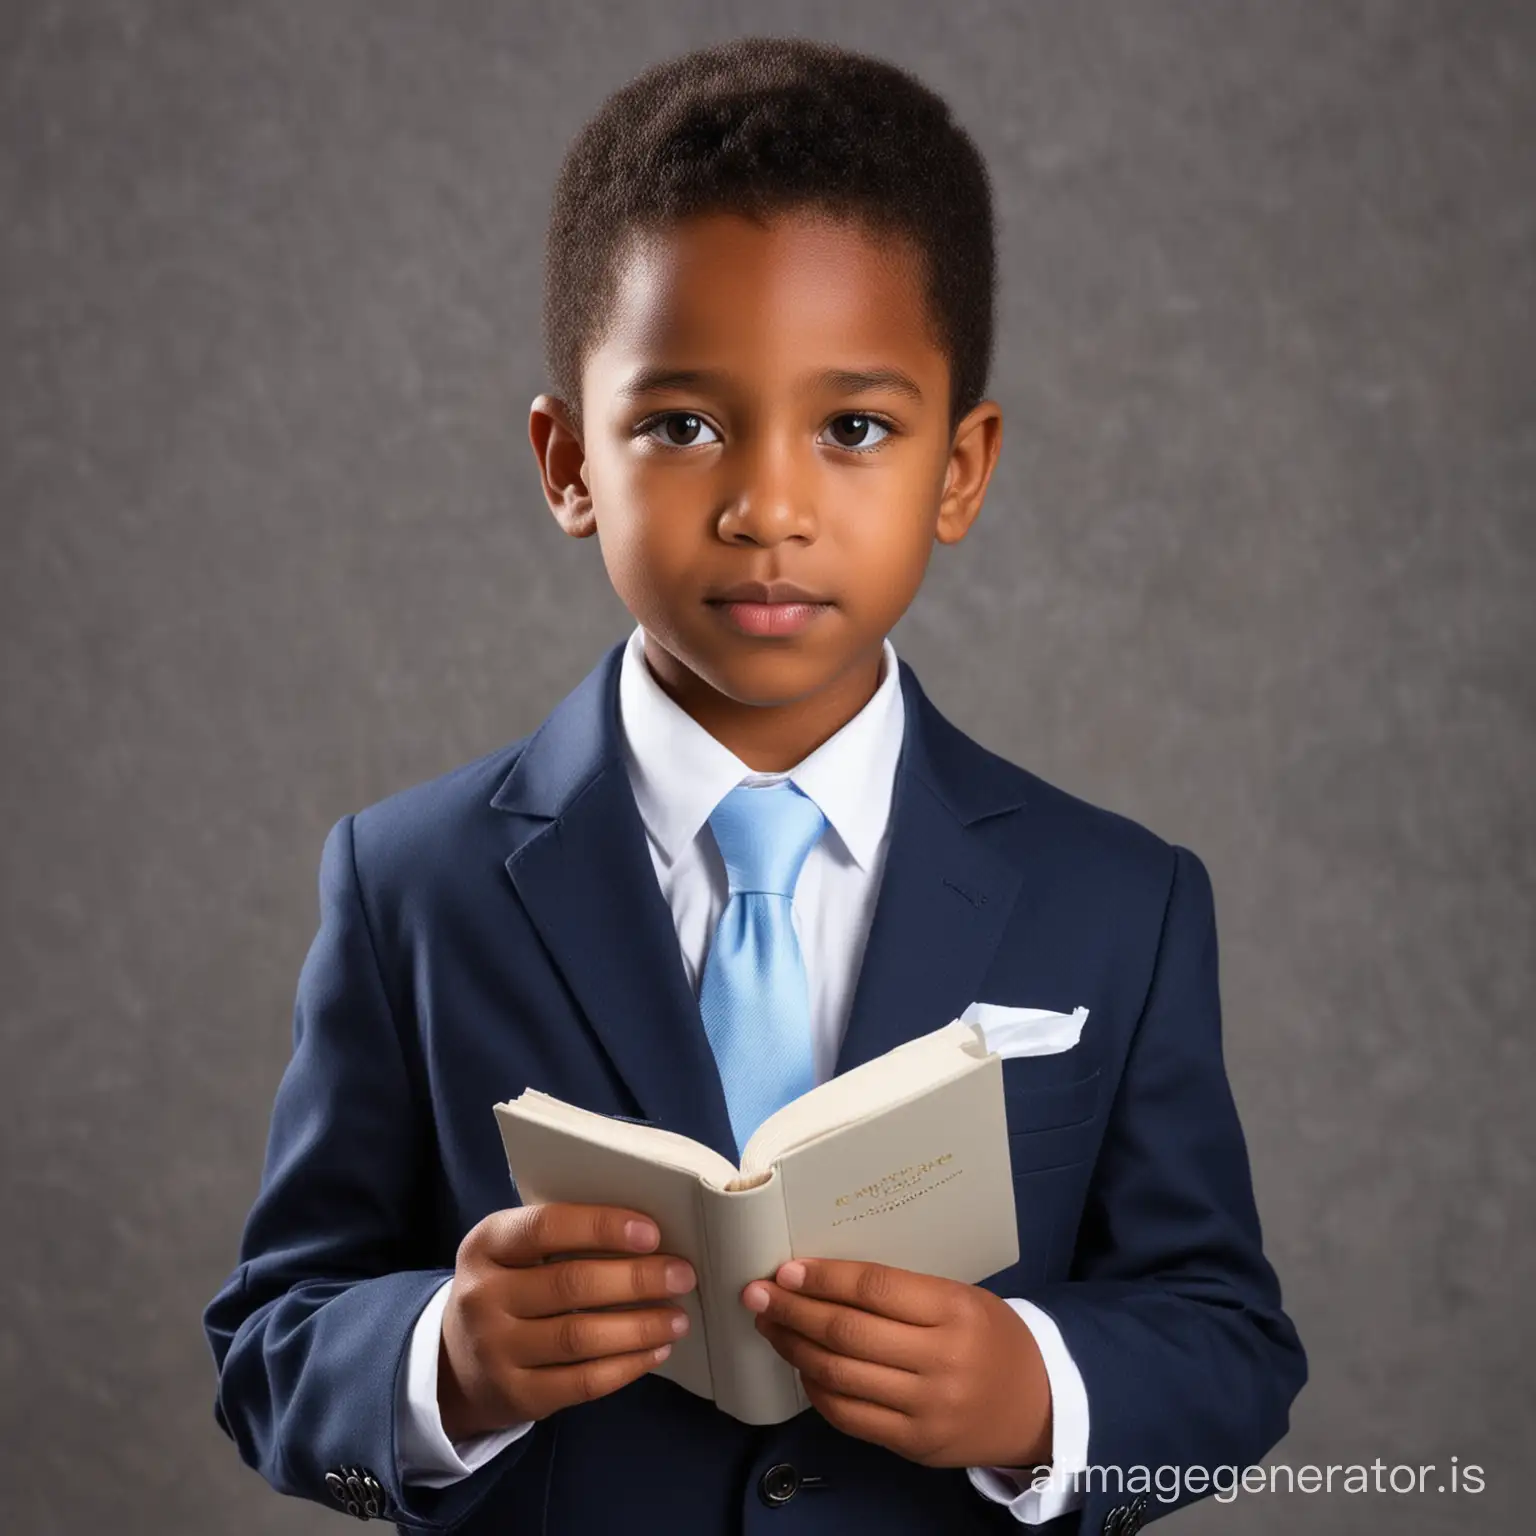 DarkSkinned-Communion-Boy-in-Navy-Blazer-with-White-Book-and-Cross-Lapel